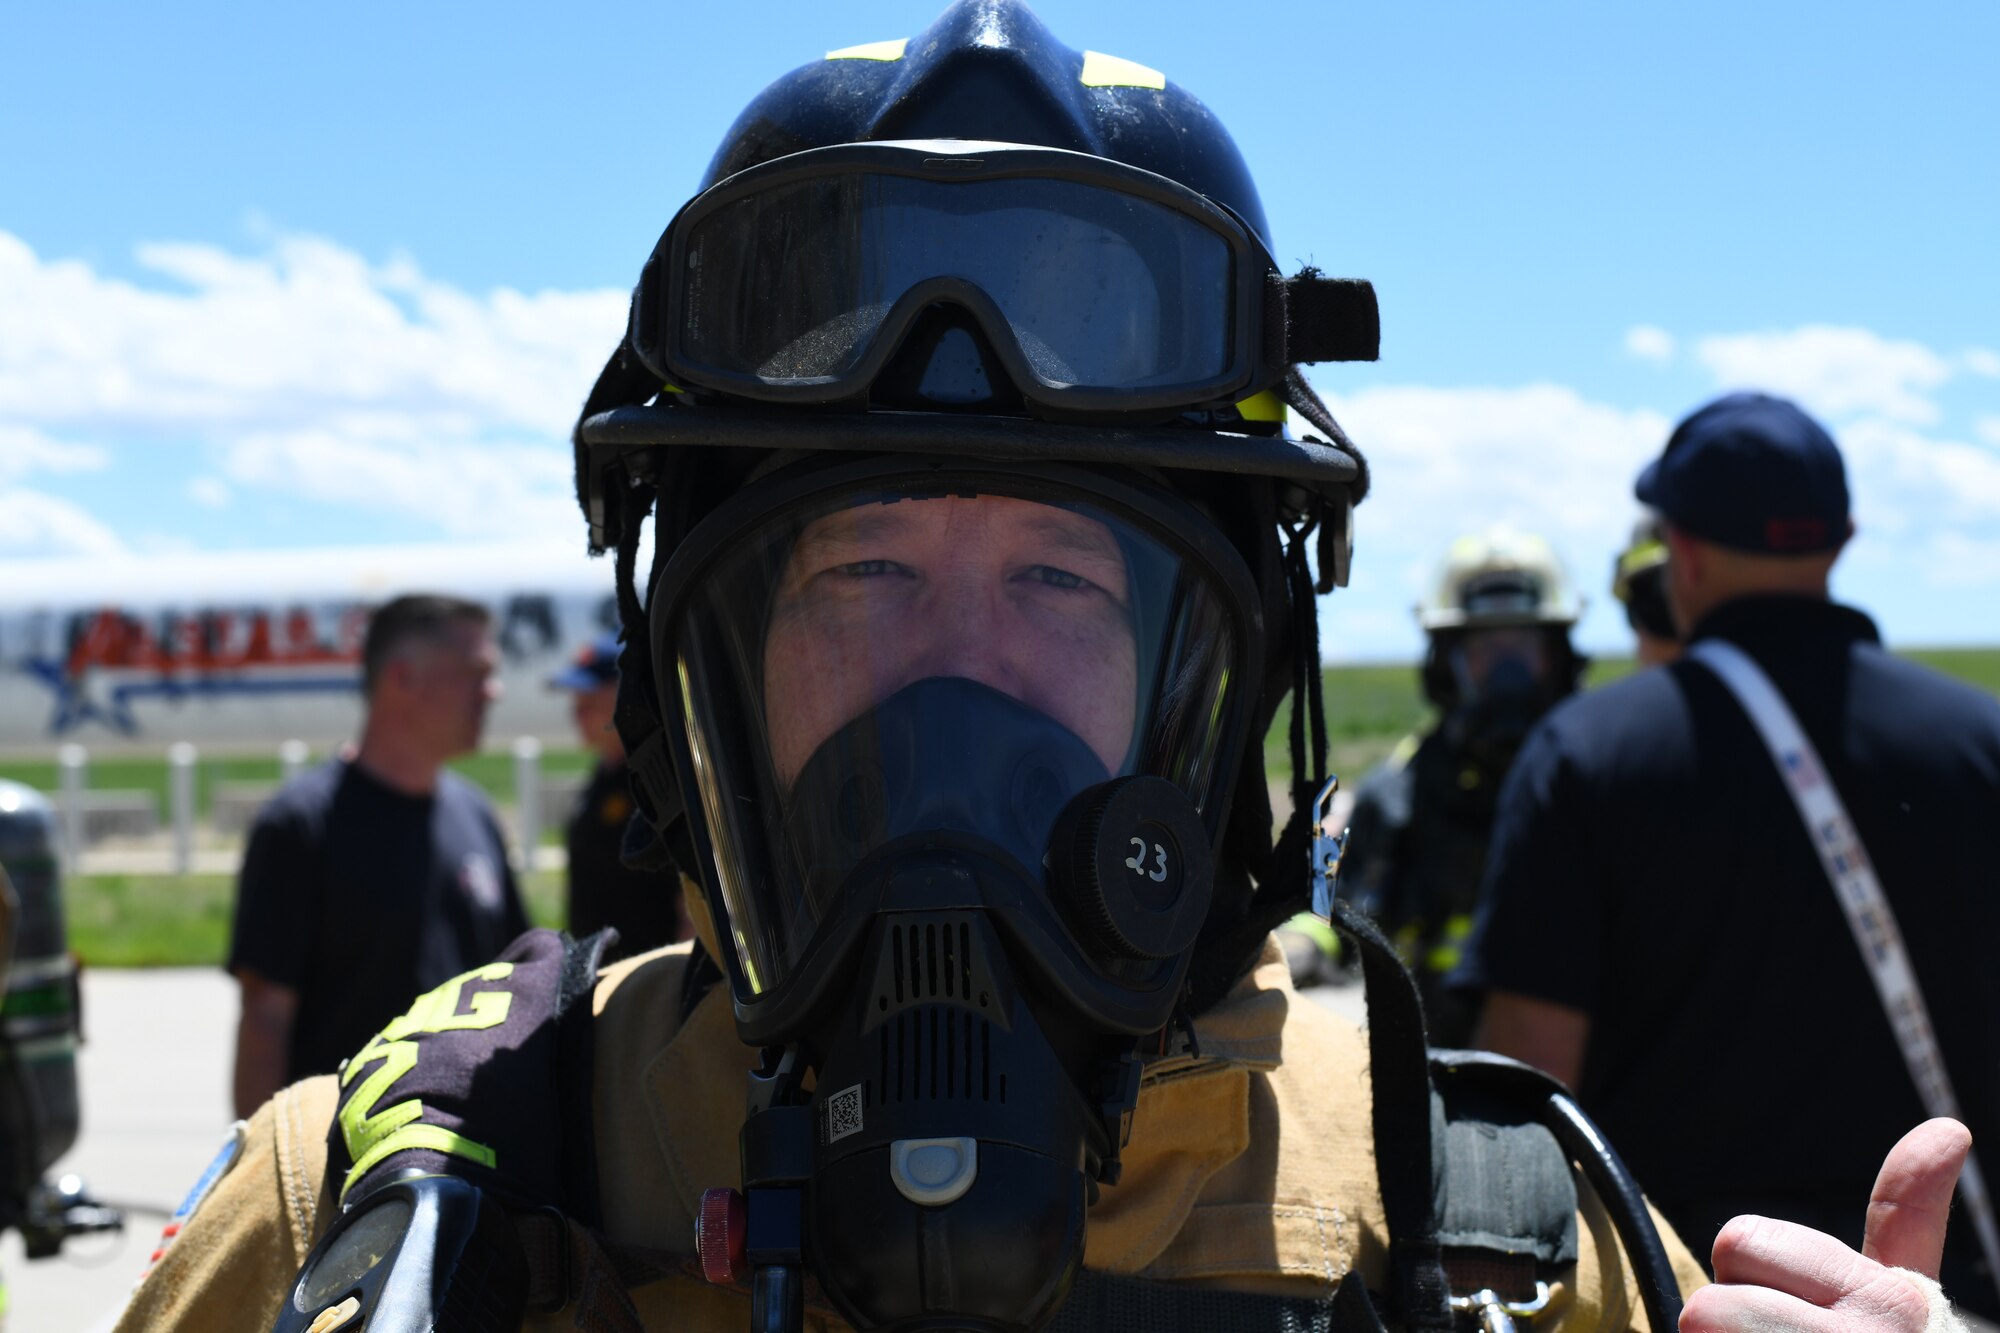 ¬¬¬¬¬¬¬¬¬¬¬¬¬¬¬¬¬¬Lt. Col. Kevin P. Campbell, 460th Mission Support Group commander, prepares for a fire exercise, May 25, 2021, on Buckley Air Force Base, Colo. The Buckley Fire Department showed Buckley Garrison leadership what their duties may entail with a simulated two-story fire exercise. (U.S. Space Force photo by Senior Airman Michael D. Mathews)